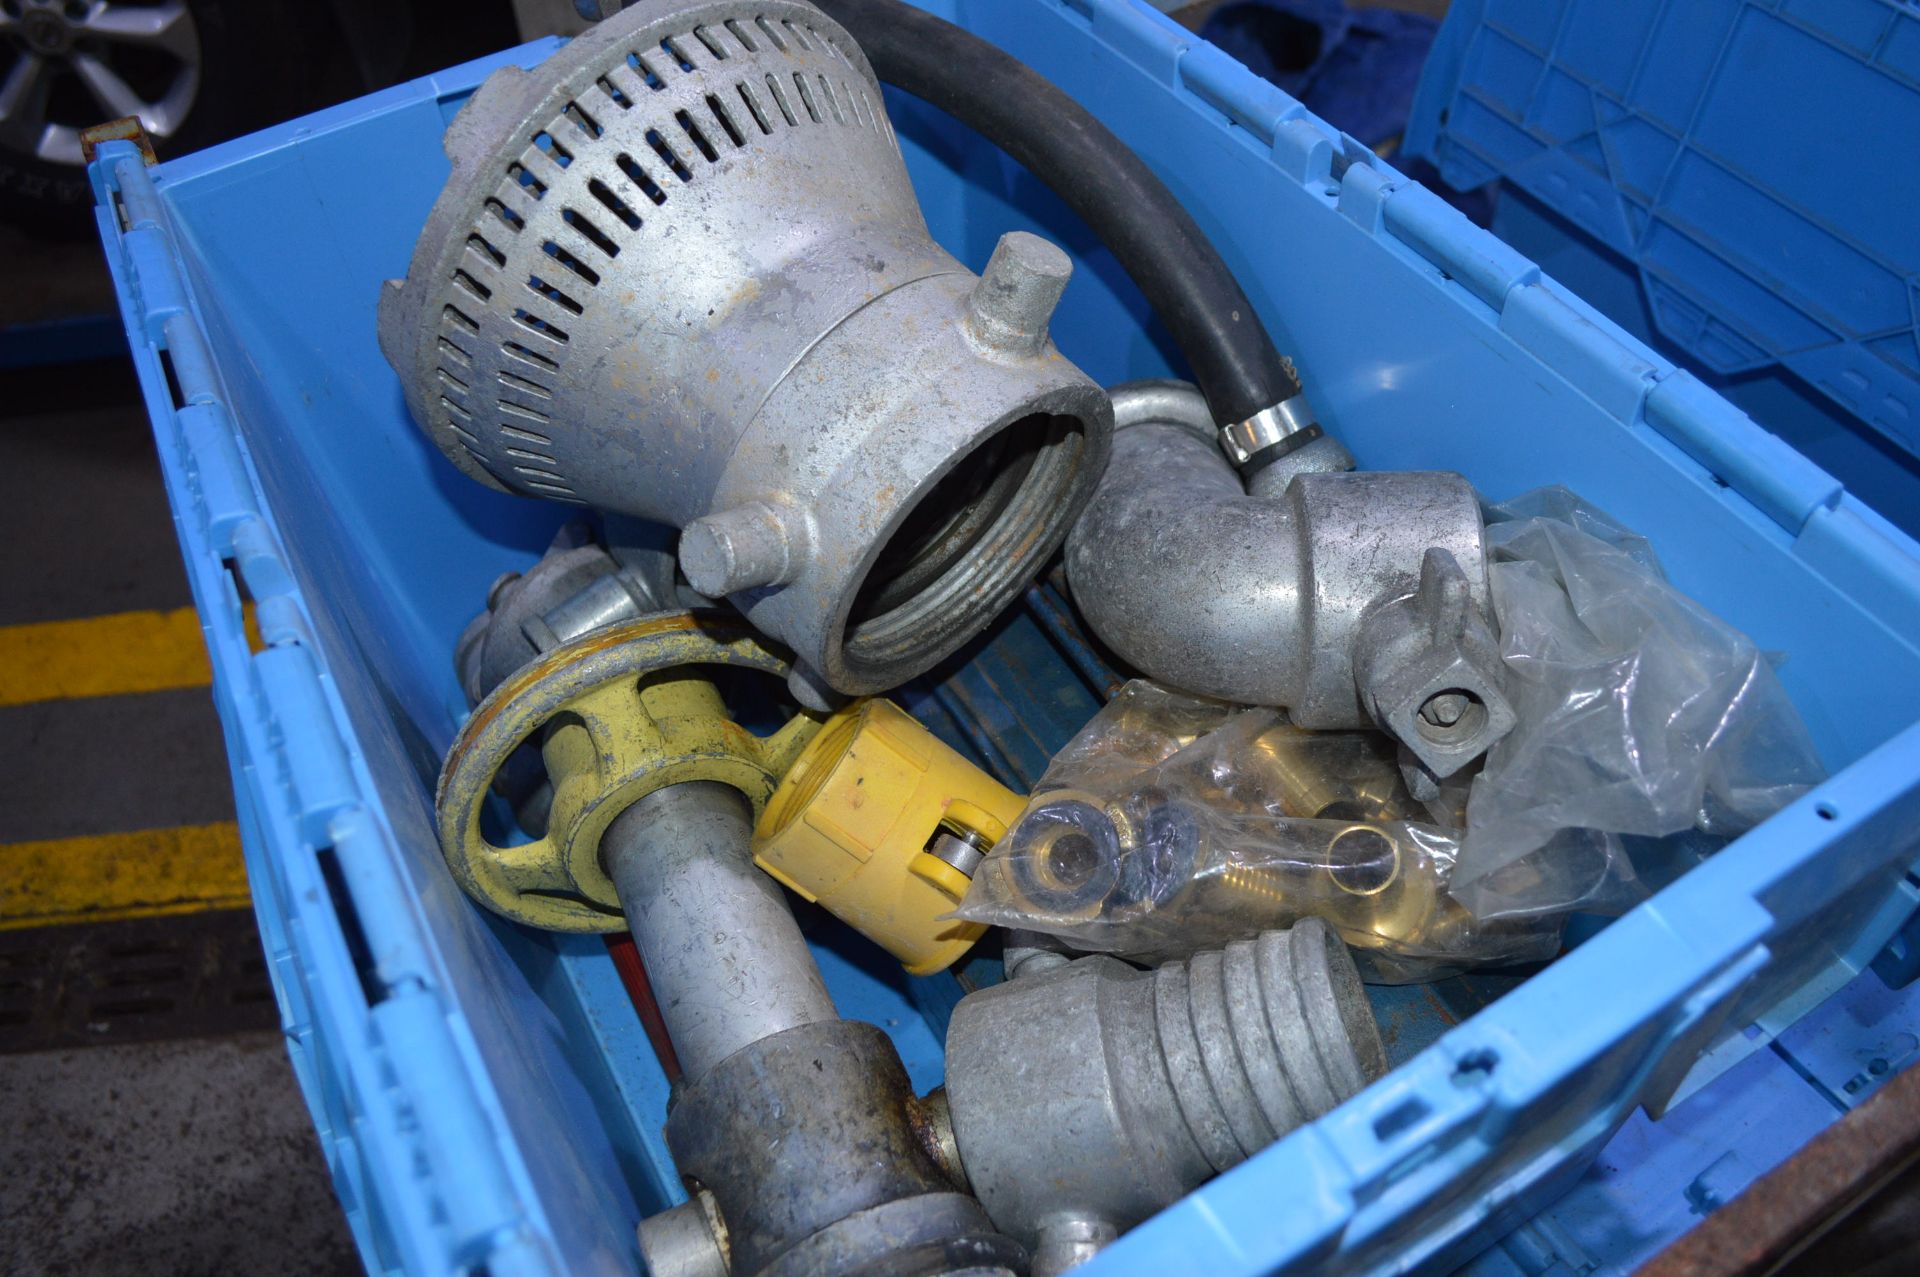 JOB LOT OF VARIOUS ITEMS, INCLUDING STOVE EQUIPMENT, BEE HIVE SMOKERS & LIFE JACKETS ETC. - Image 6 of 14